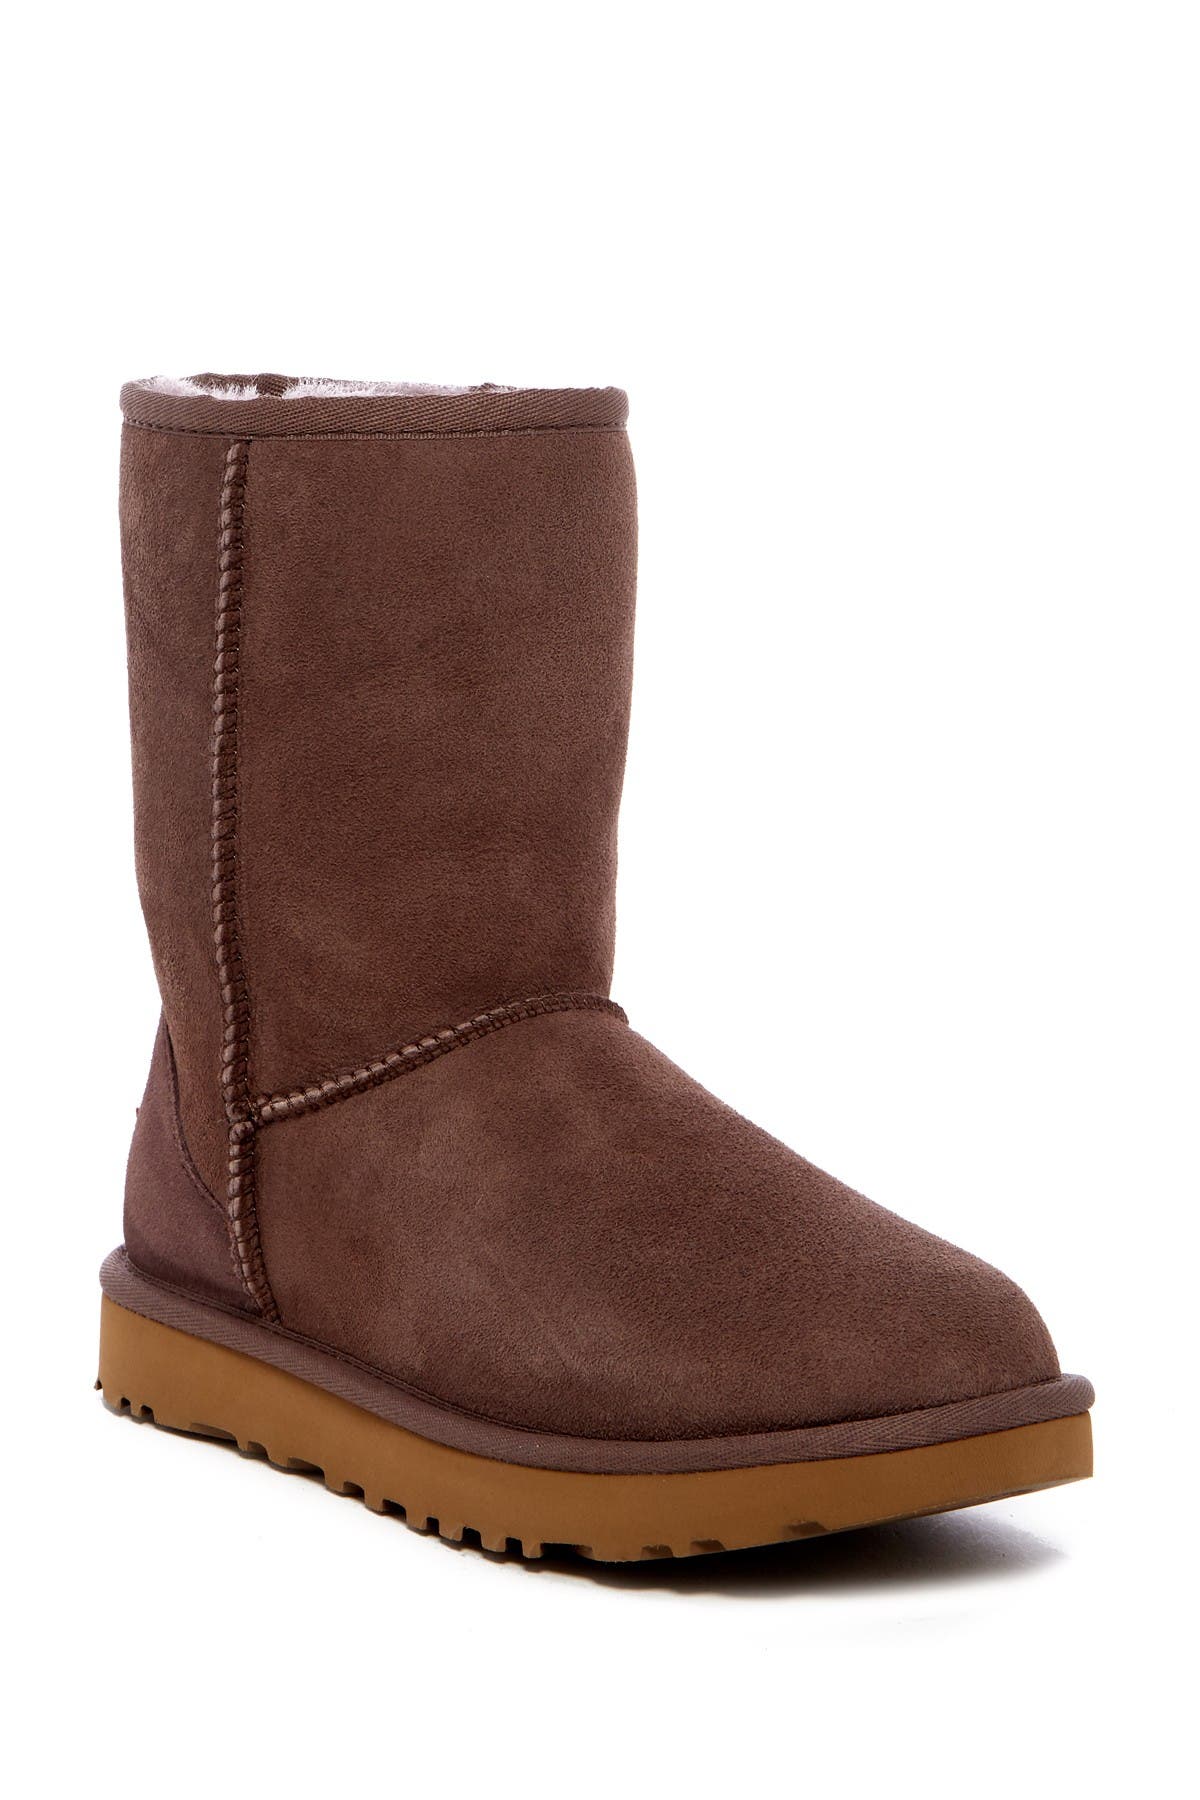 ugg classic ii genuine shearling lined short boot